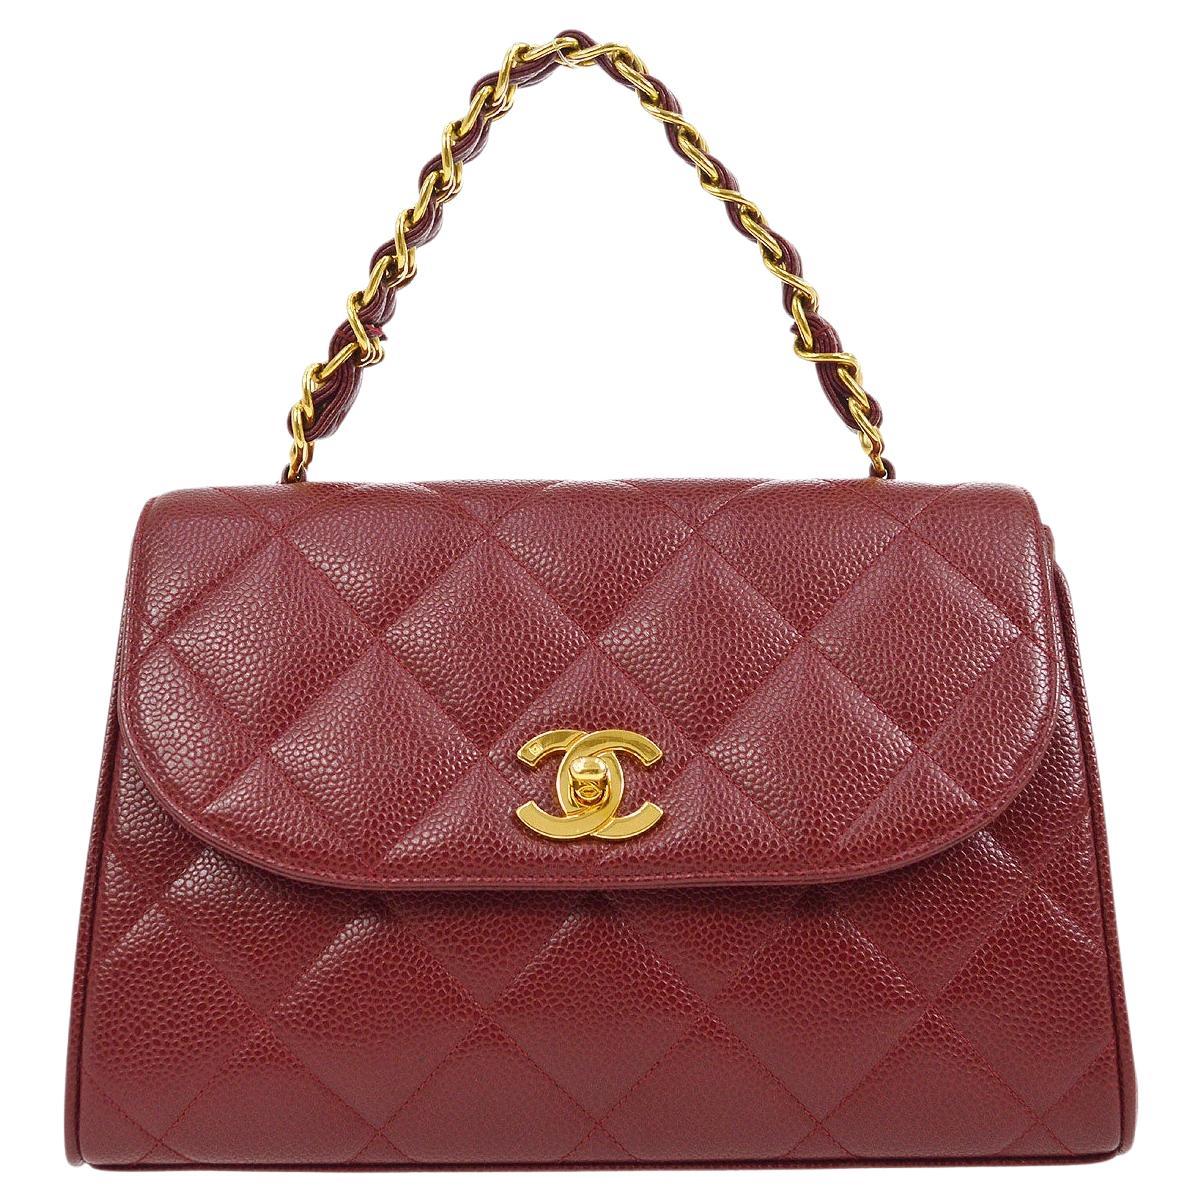 CHANEL Red Caviar Leather Gold Top Handle Flap Bag